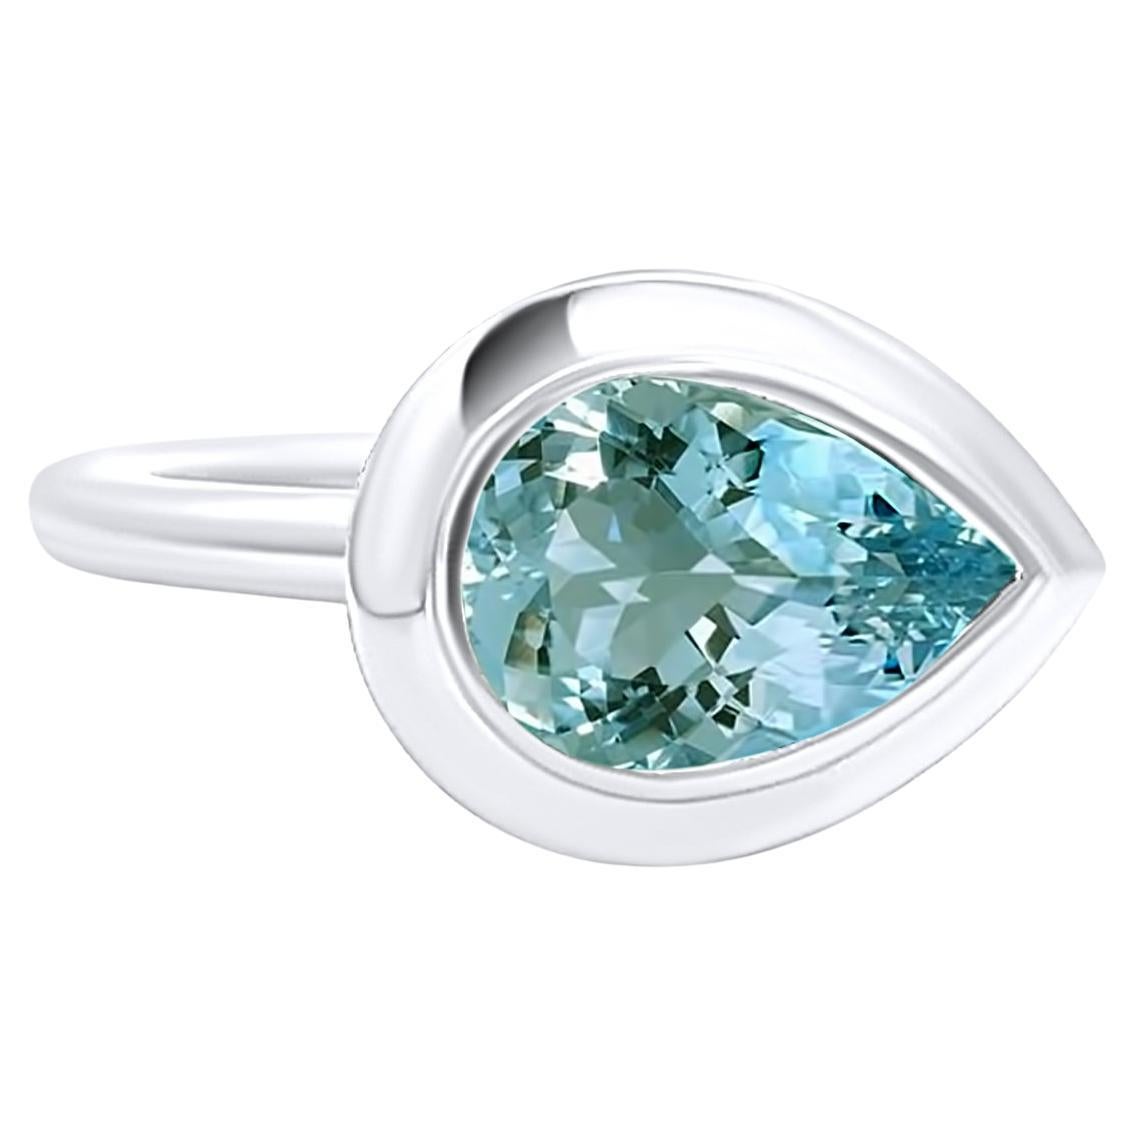 Natural Solitaire Aquamarine Ring 6.5 14k W Gold 1.60 TCW Certified